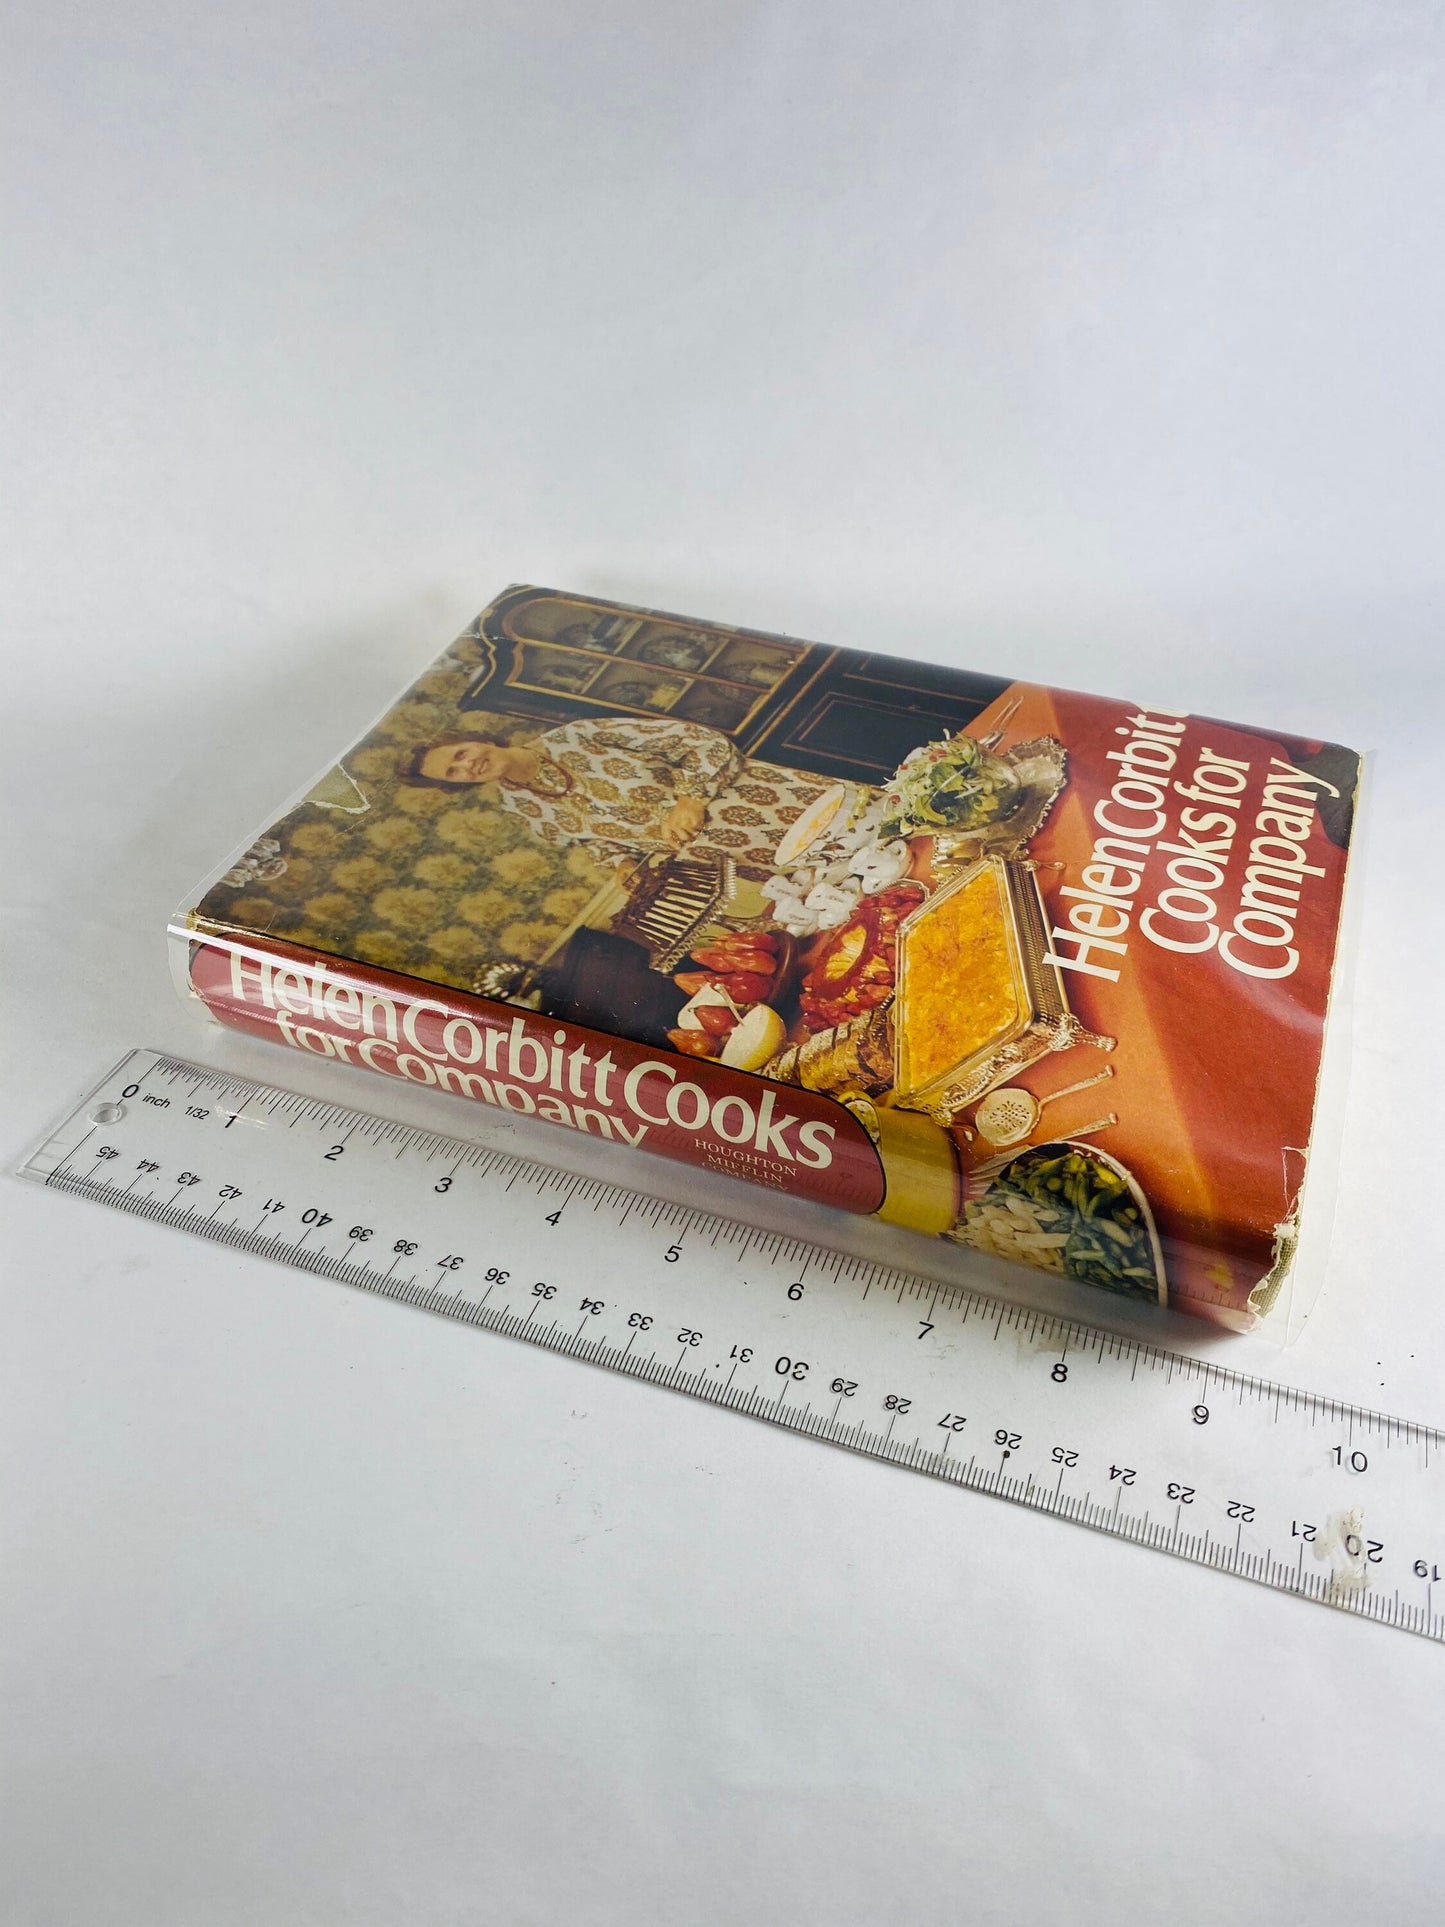 SIGNED Helen Corbitt Cooks for Company Cookbook FIRST edition Vintage book circa 1974. Mid-century cookbook Iconic Cook Book Neiman-Marcus